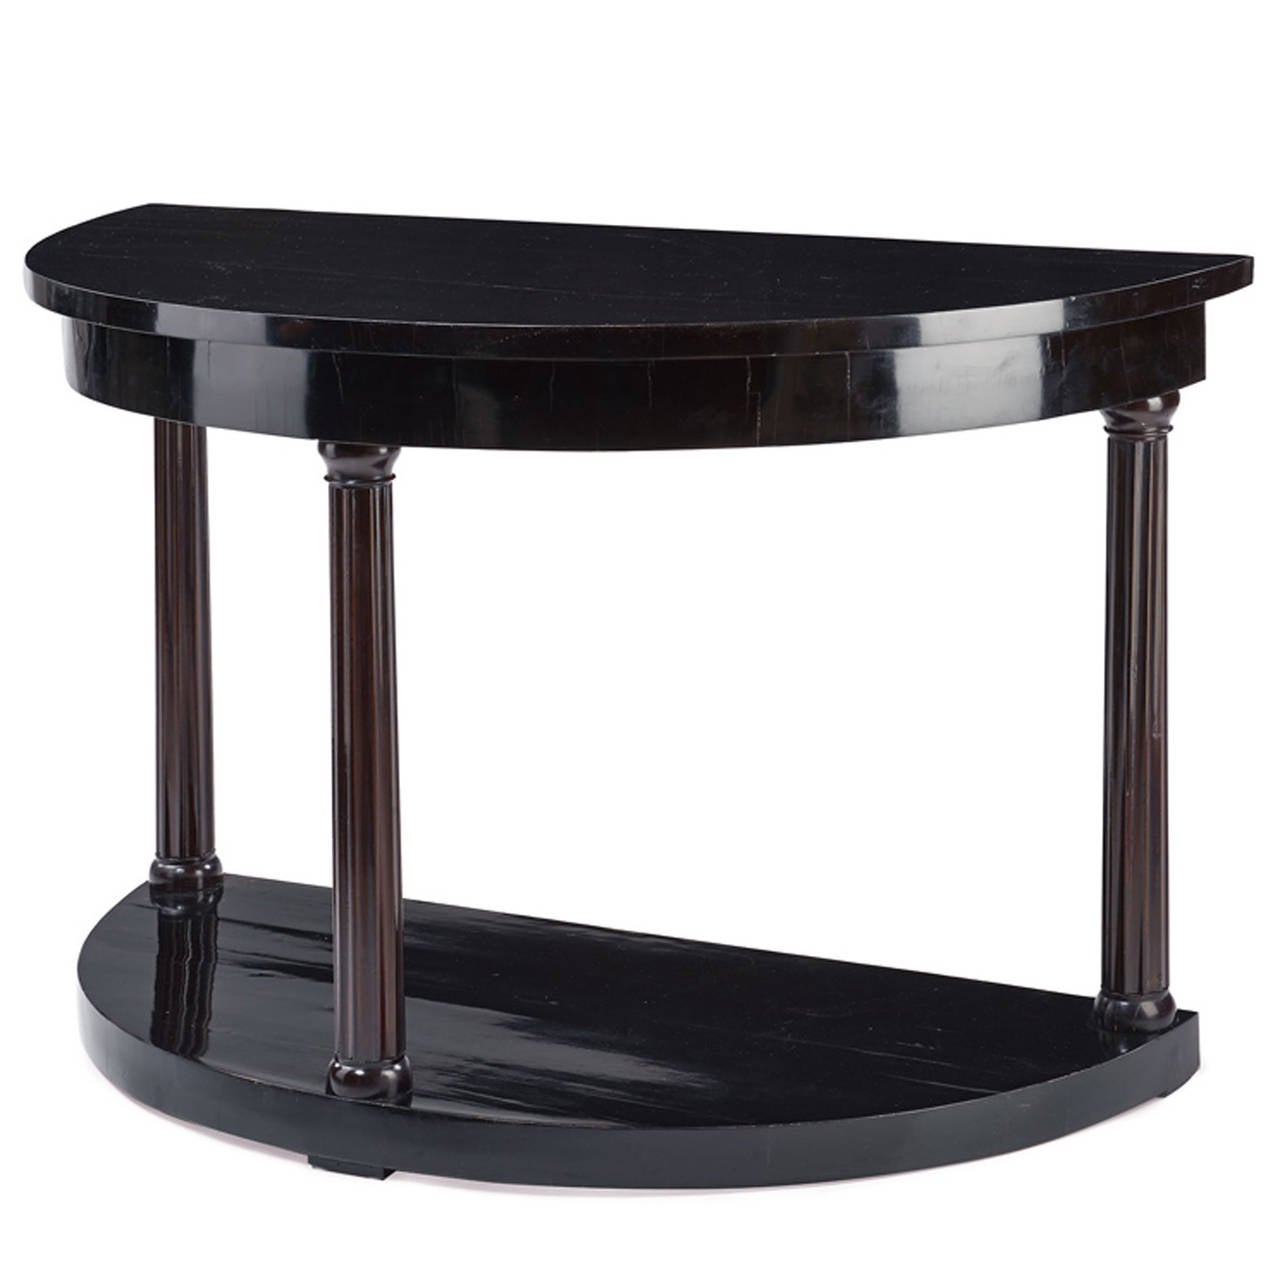 Wonderful ebonised Demi Lune console, Vienna dating about 1825.
Elegant Biedermeier Console on a design by Josef Danhauser,
style typical and world-famous type of the famous Viennese architect.
Half round base plate, veneered back